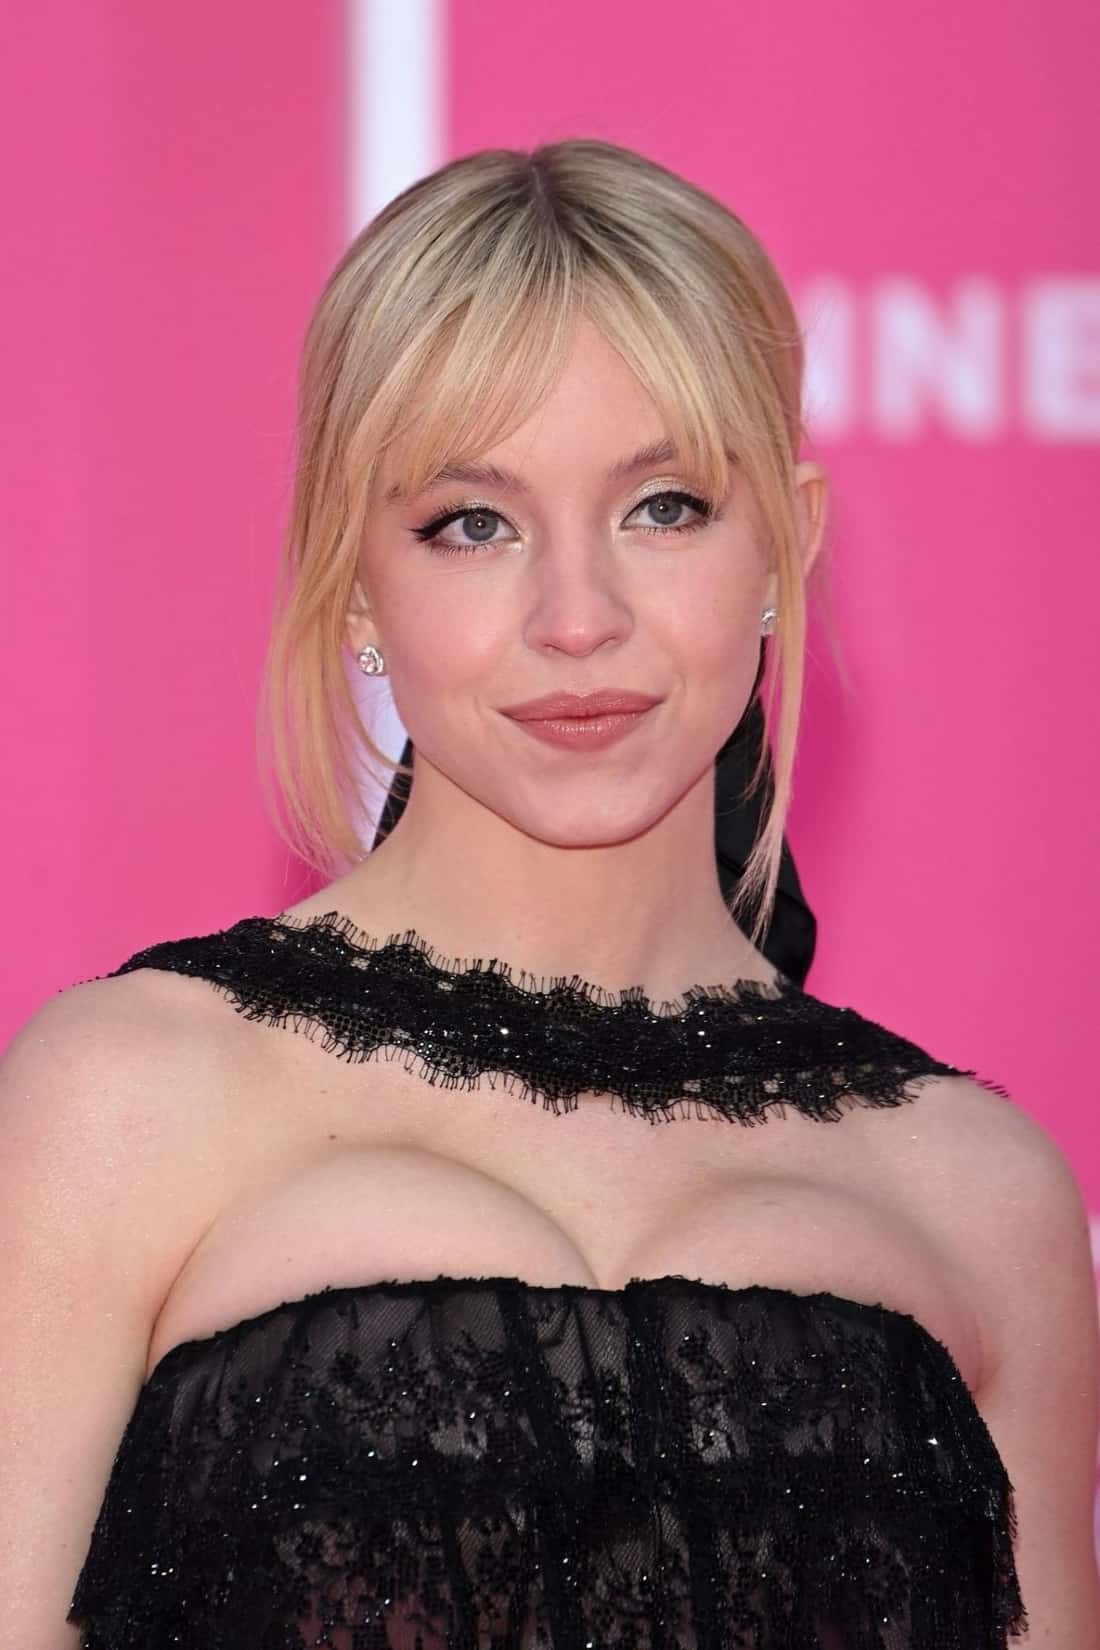 Sydney Sweeney Wore a Racy Dress at the Canneseries Festival in France